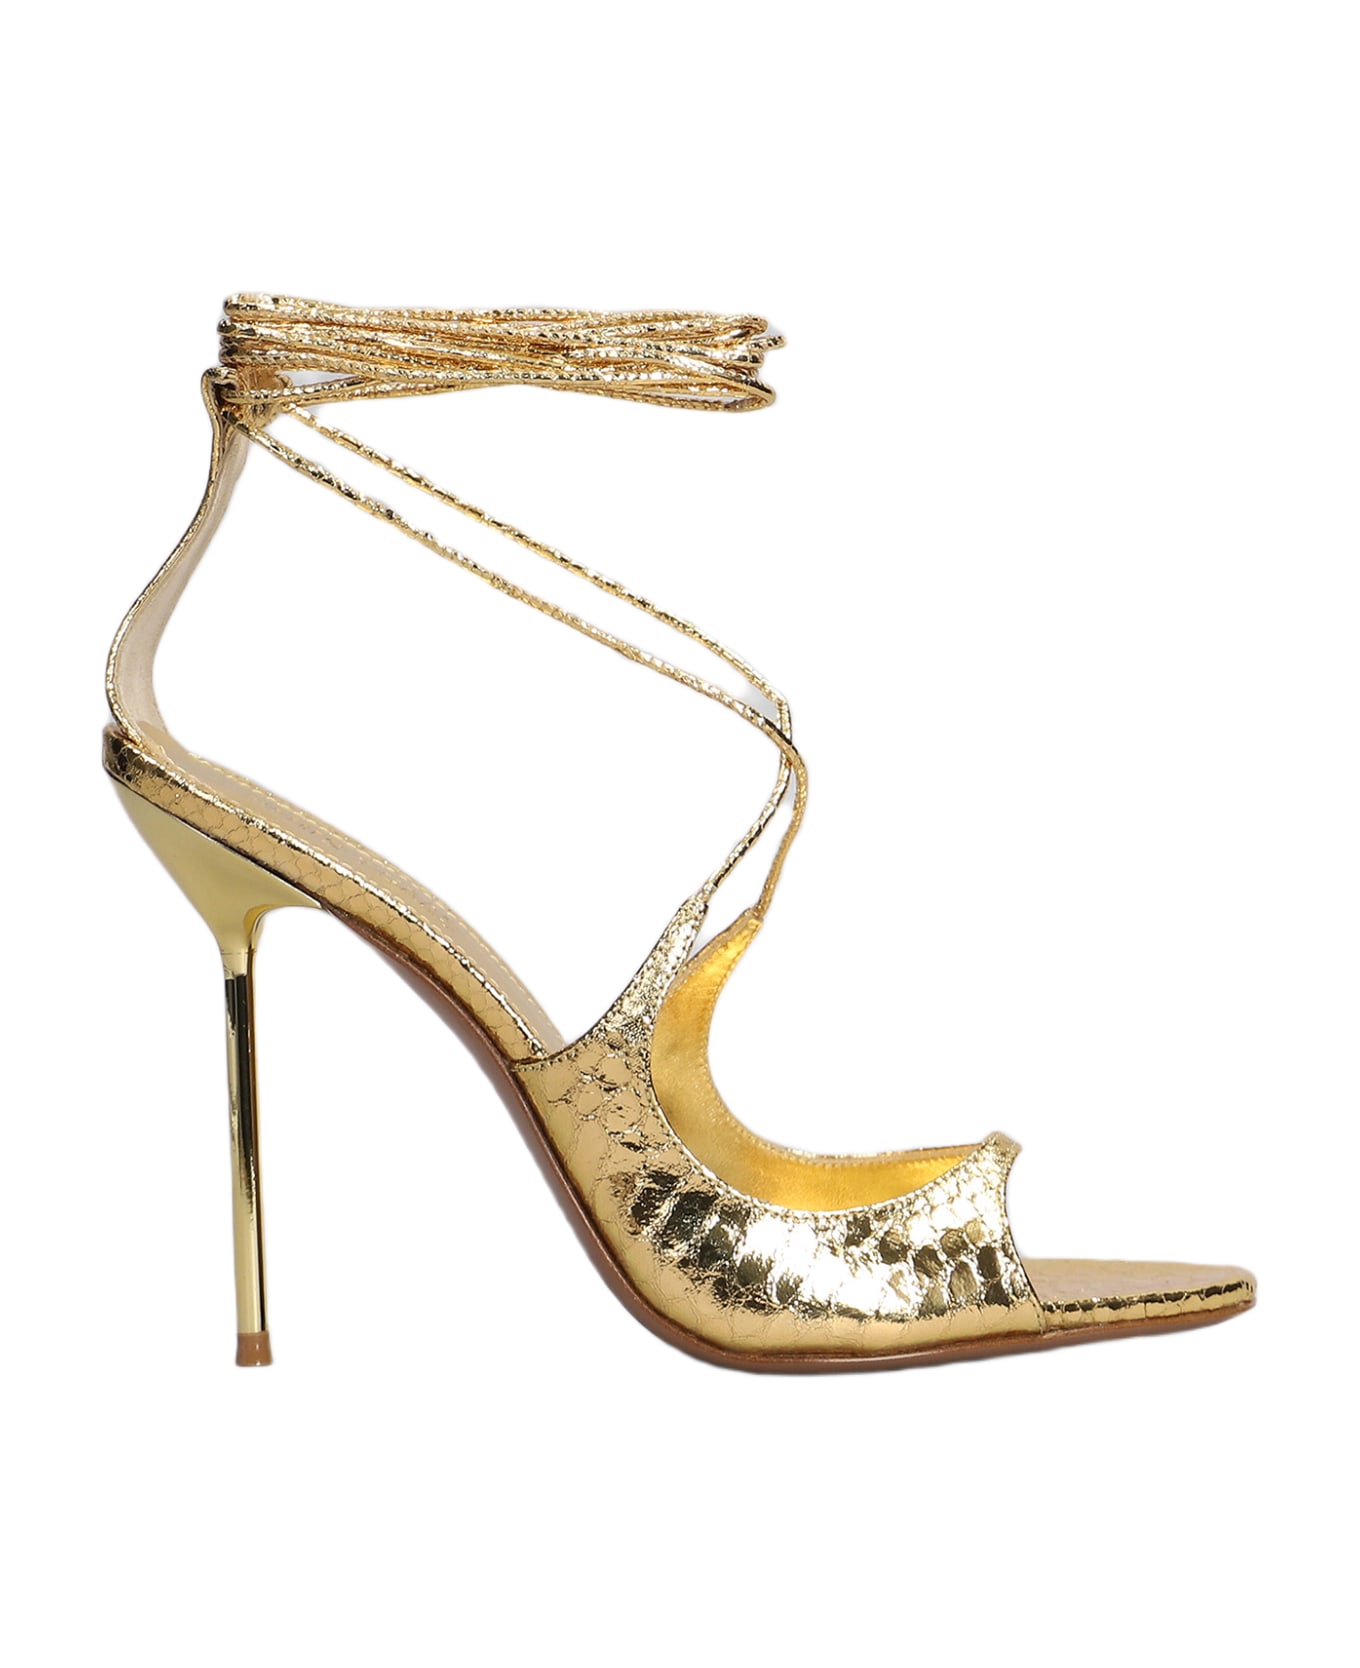 Paris Texas Loulou Sandals In Gold Leather - gold